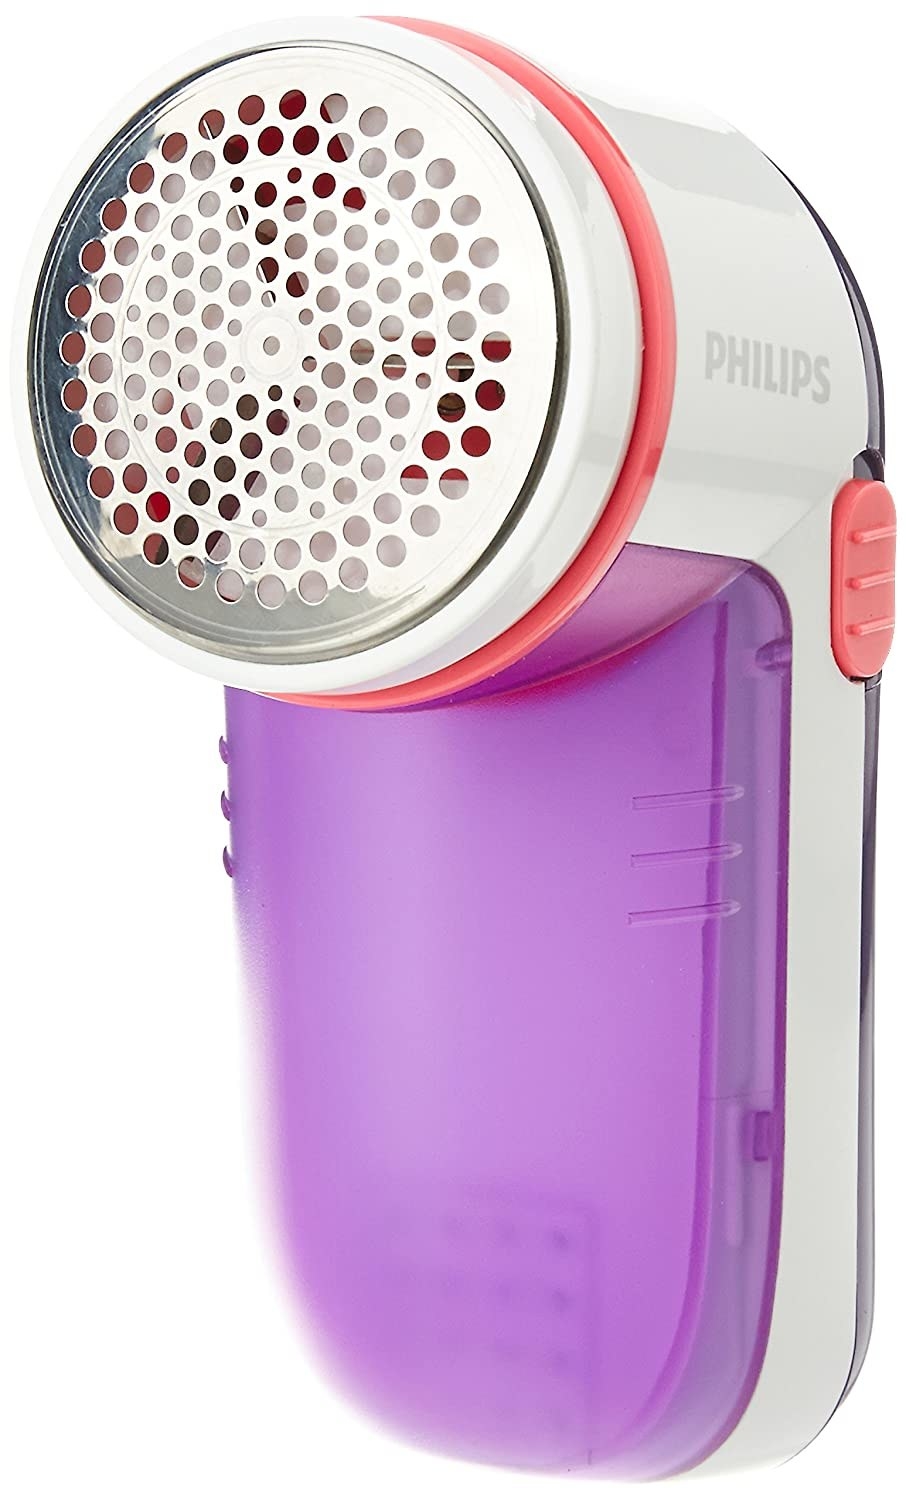 A white and purple fabric shaver